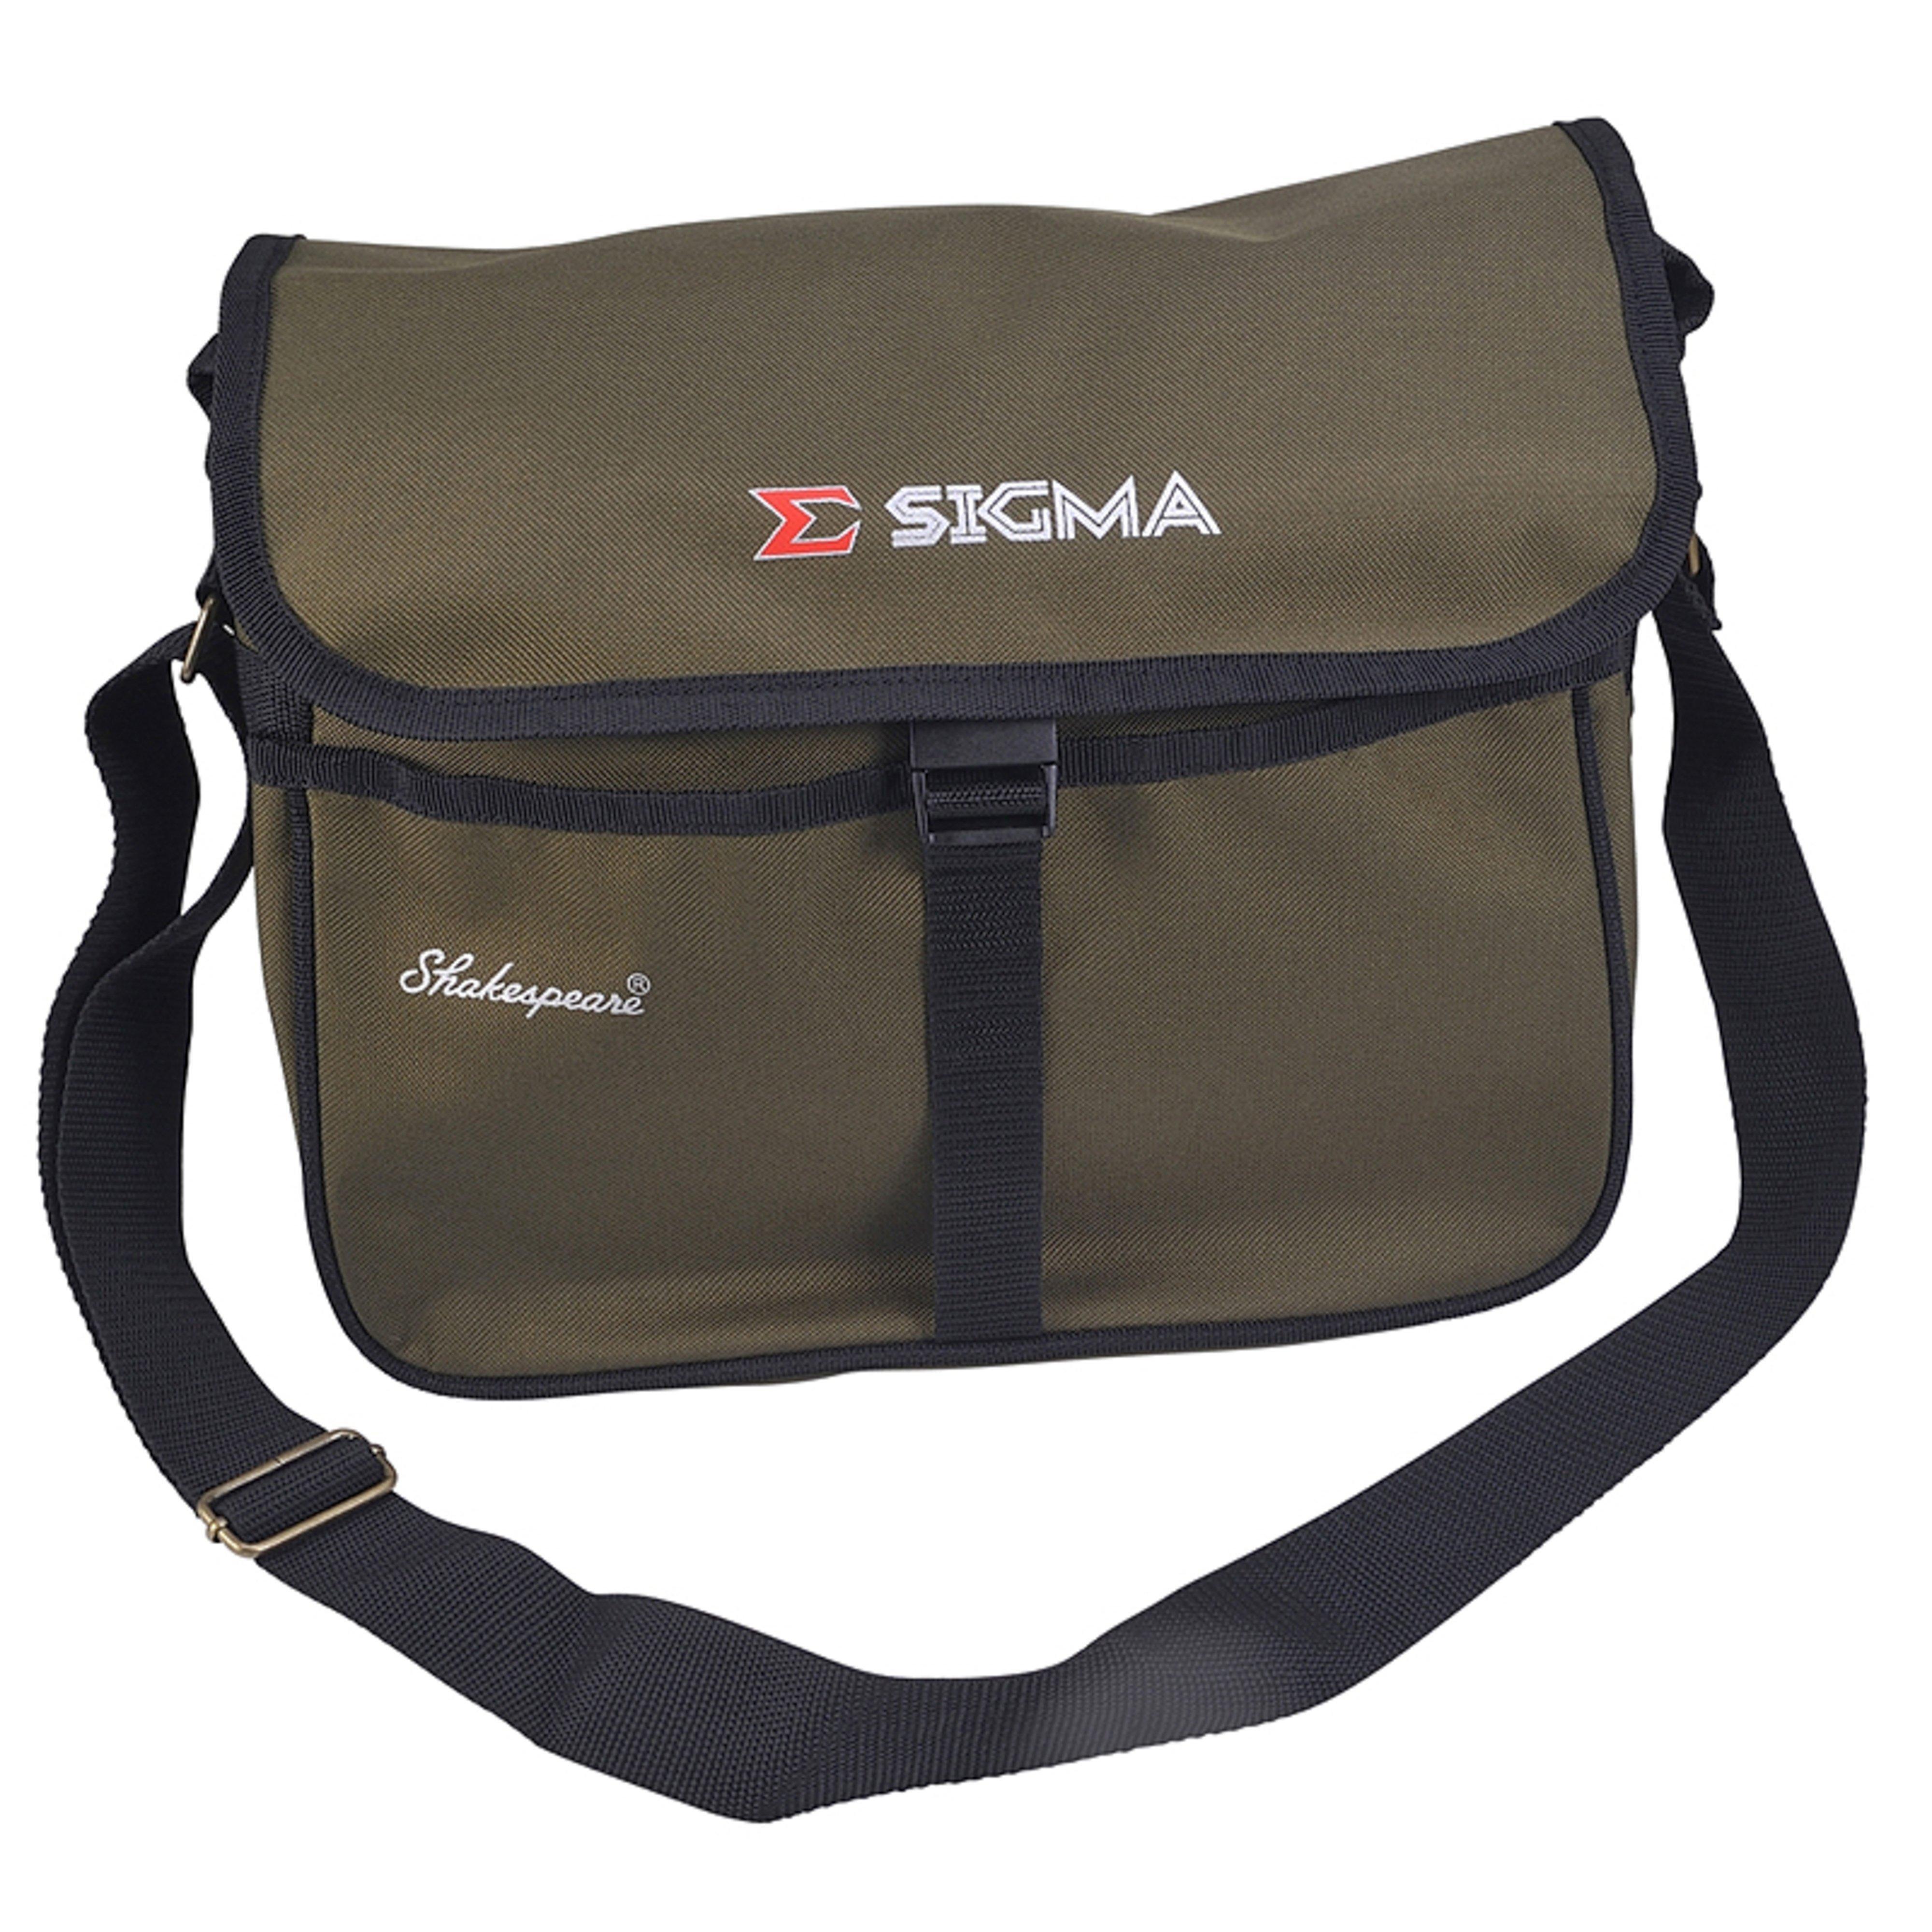 Shakespeare Sigma Game Bag Review